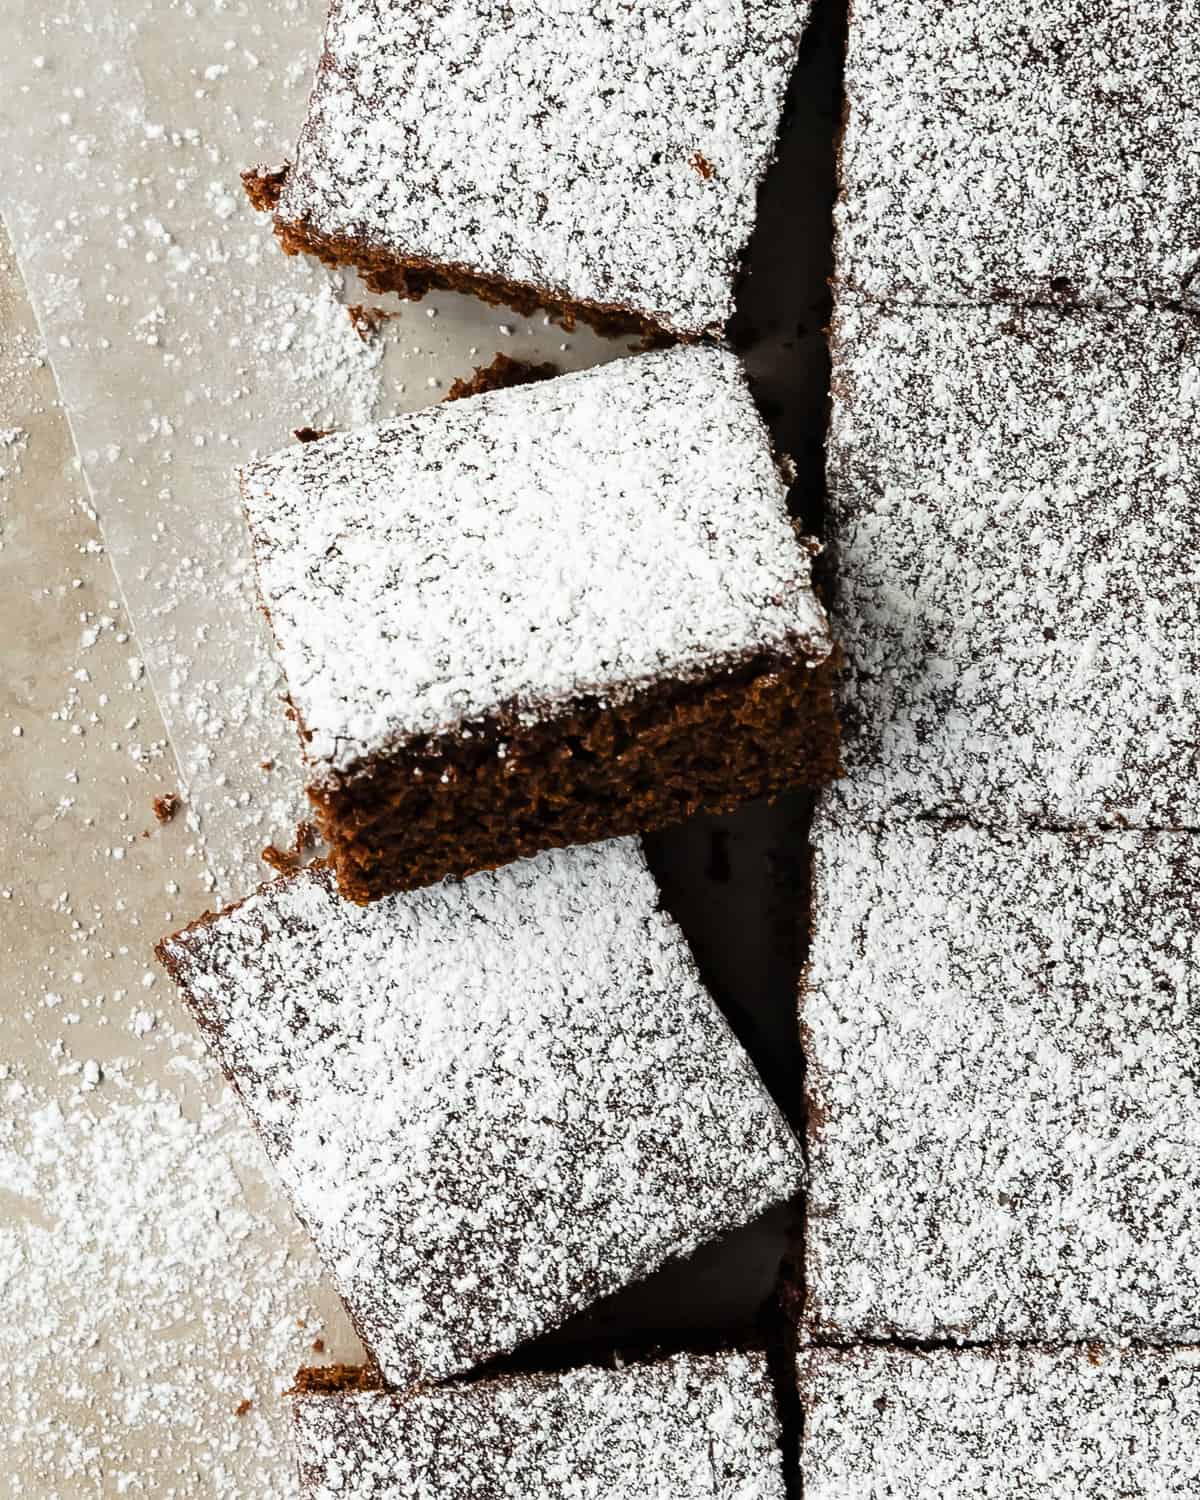 Molasses cake is a deliciously rich, tender and moist cake filled with molasses, a touch bright lemon zest and lots of cozy warming spices. Top this old fashioned molasses cake with a dusting of powdered sugar for the perfect simple, easy to make and festive cake. 